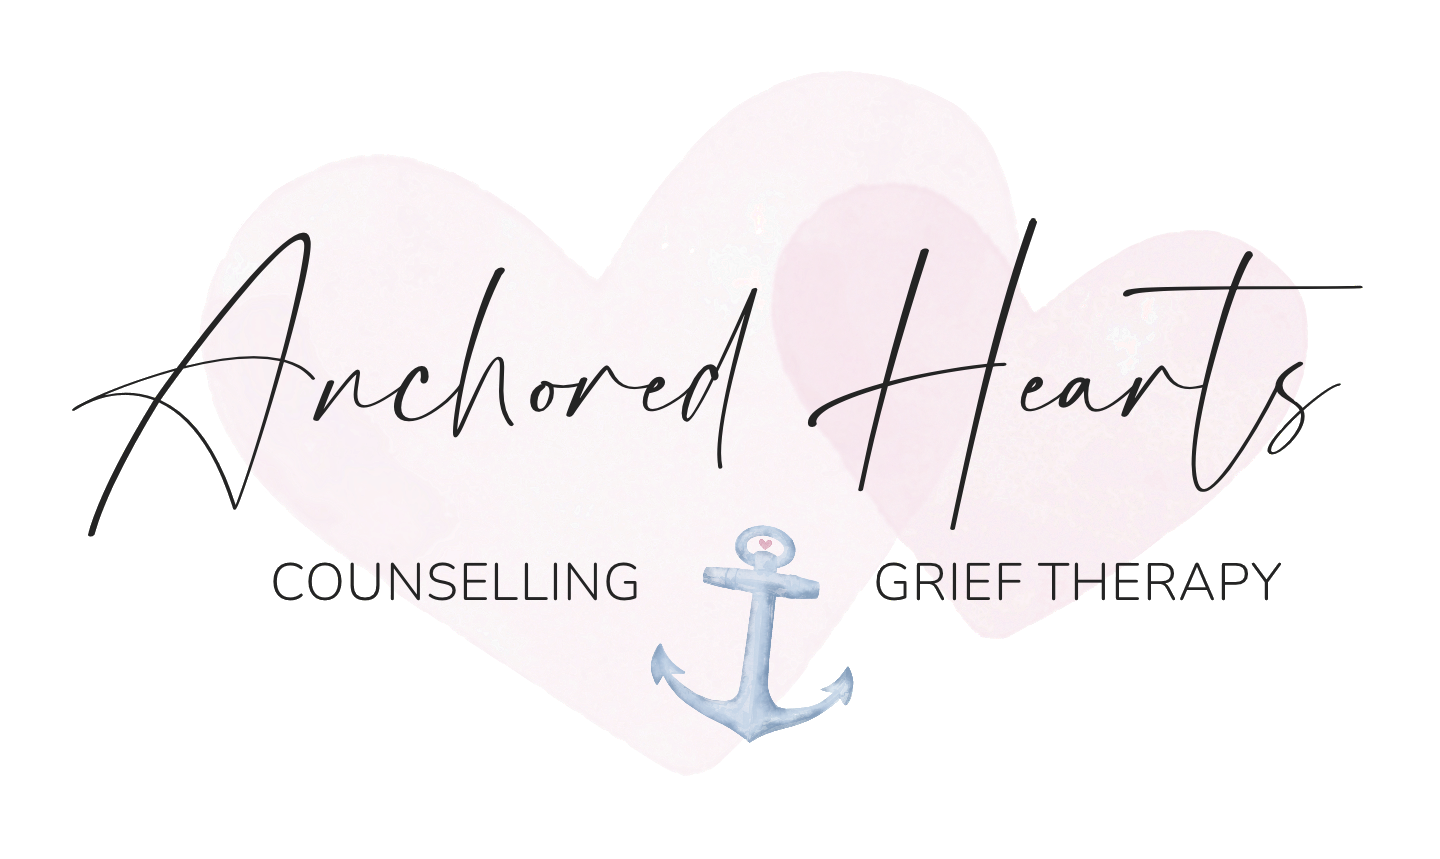 Anchored Hearts Counselling and Grief Therapy